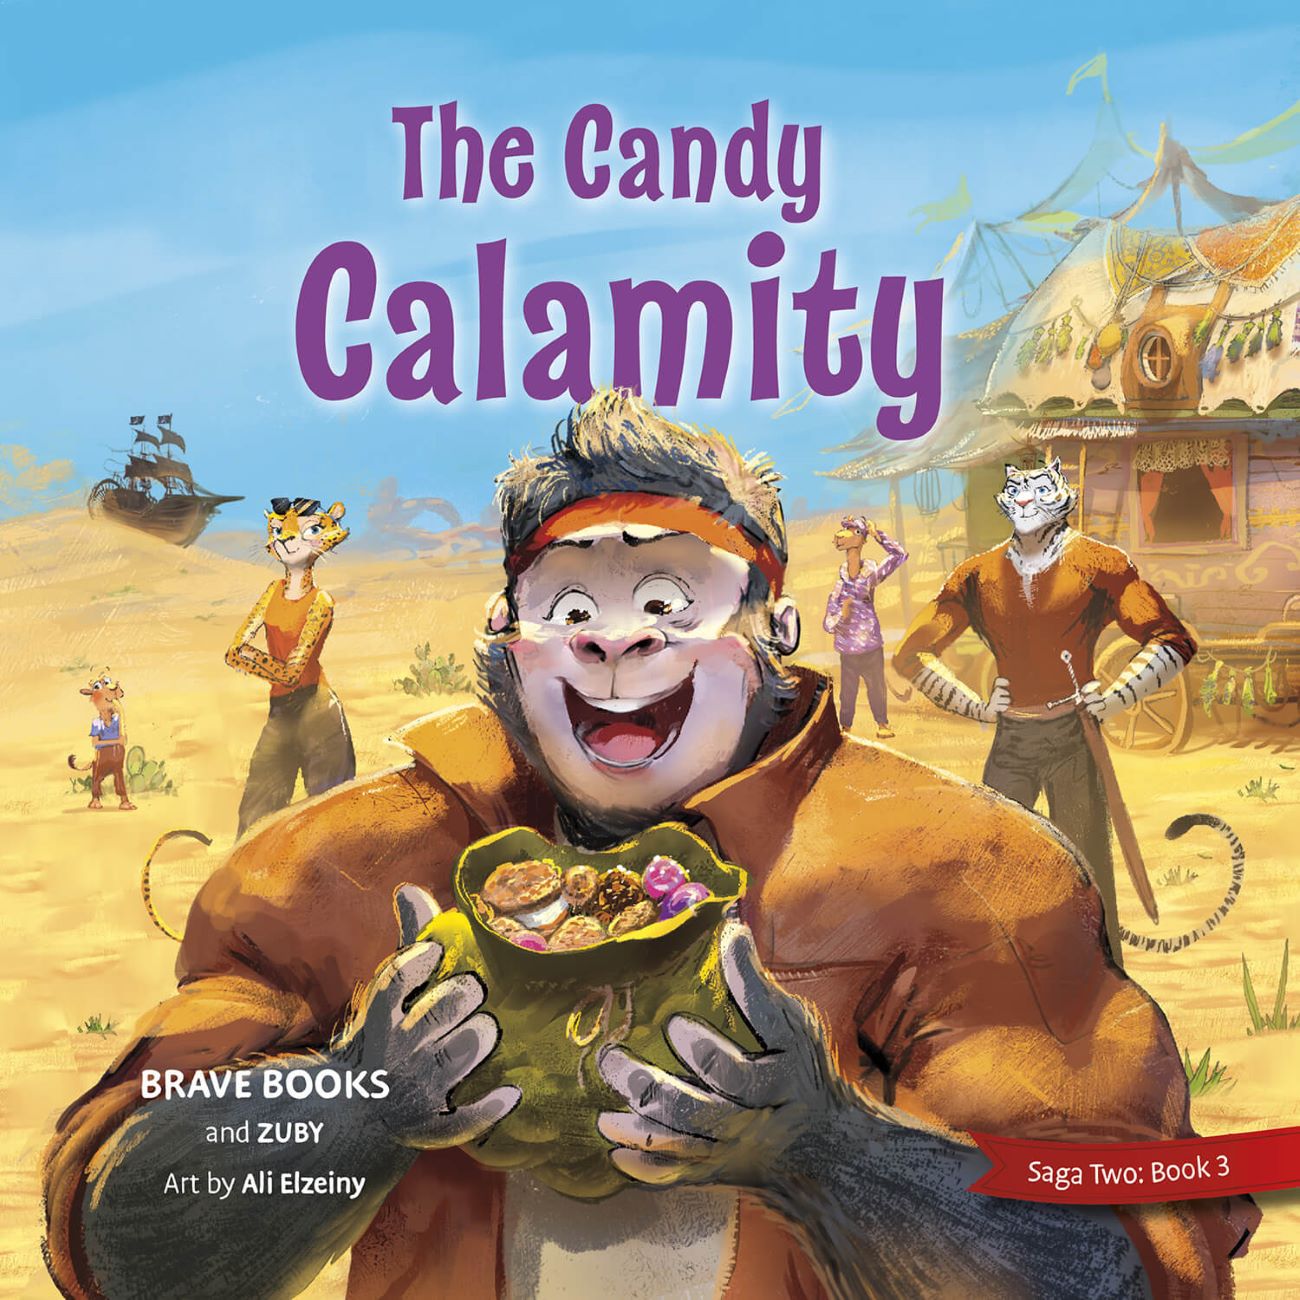 The Candy Calamity